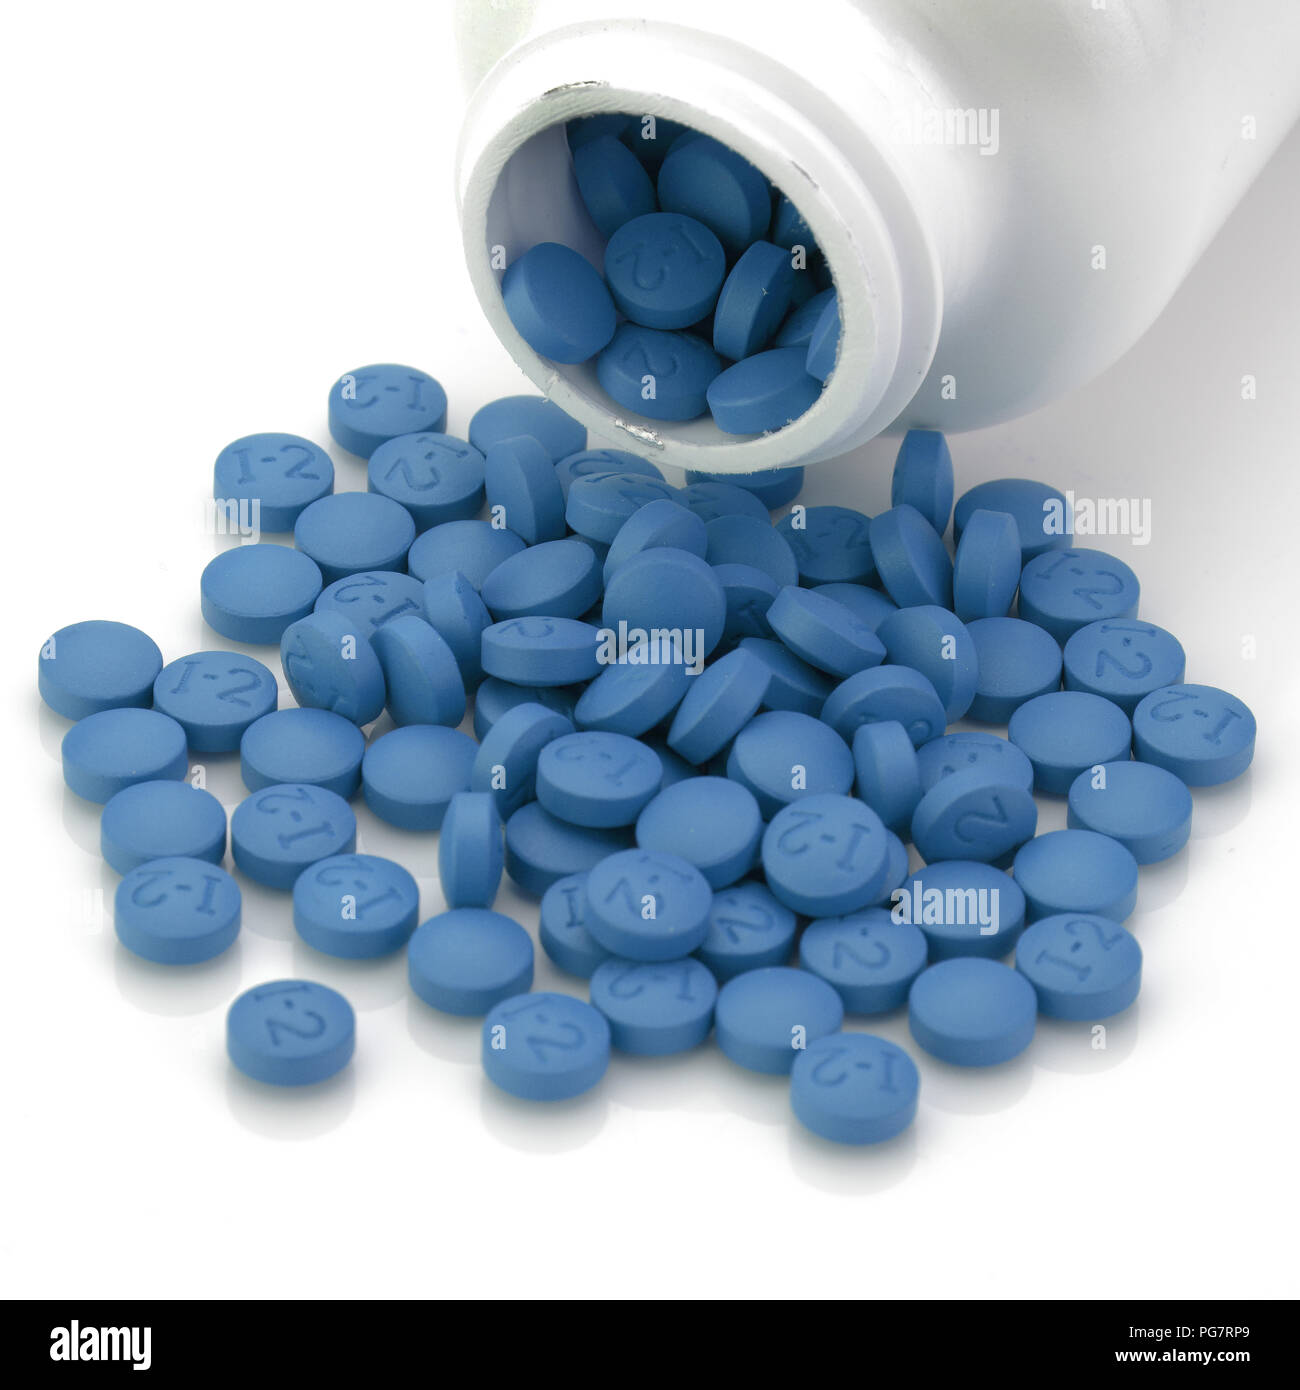 Download A Pile Of Blue Pills And Medication Bottle Stock Photo Alamy Yellowimages Mockups